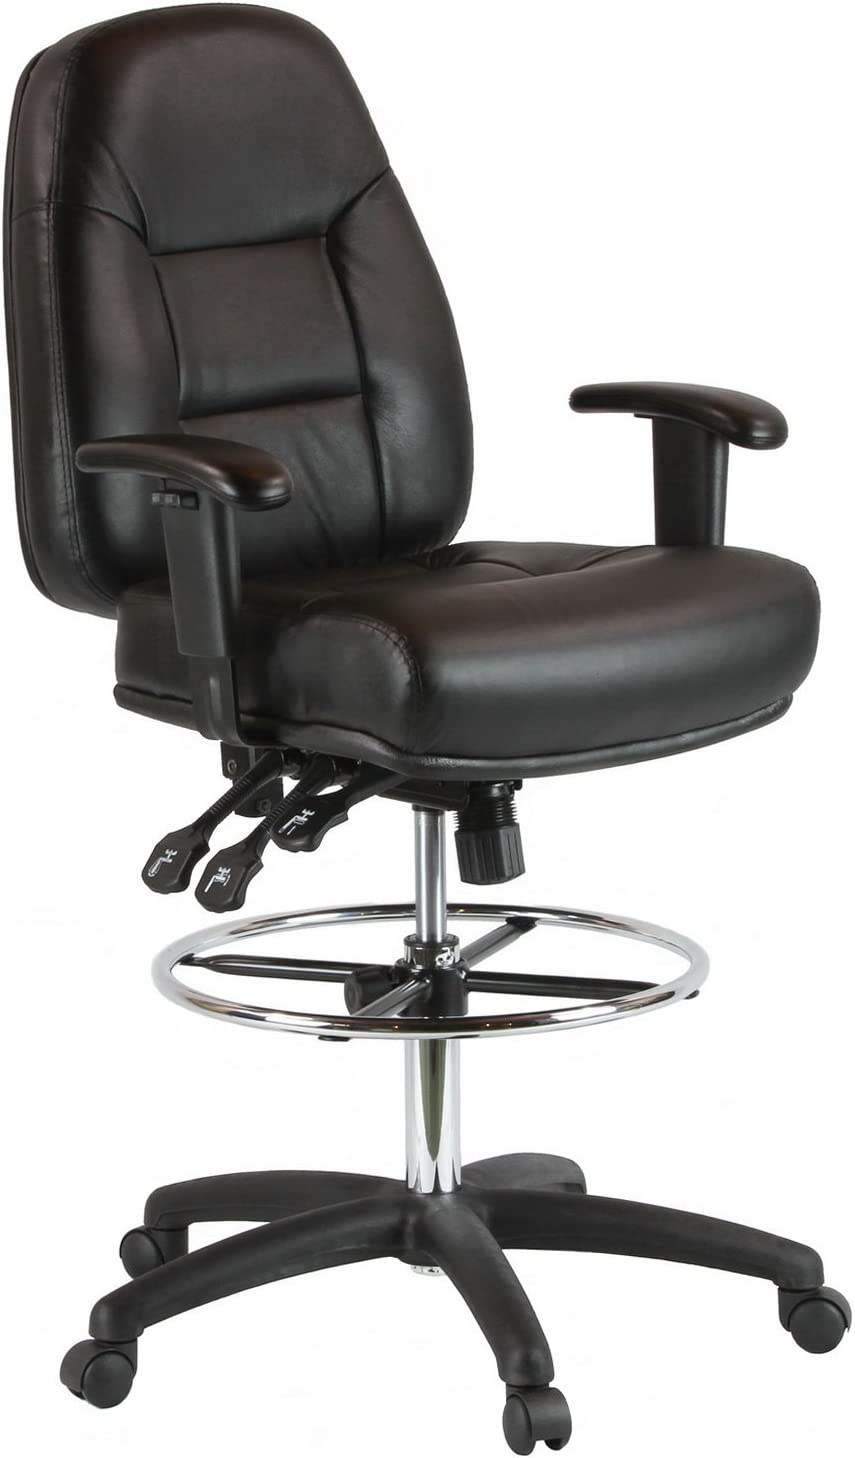 Harwick Premium Leather Drafting Chair with Arms - Black Leather